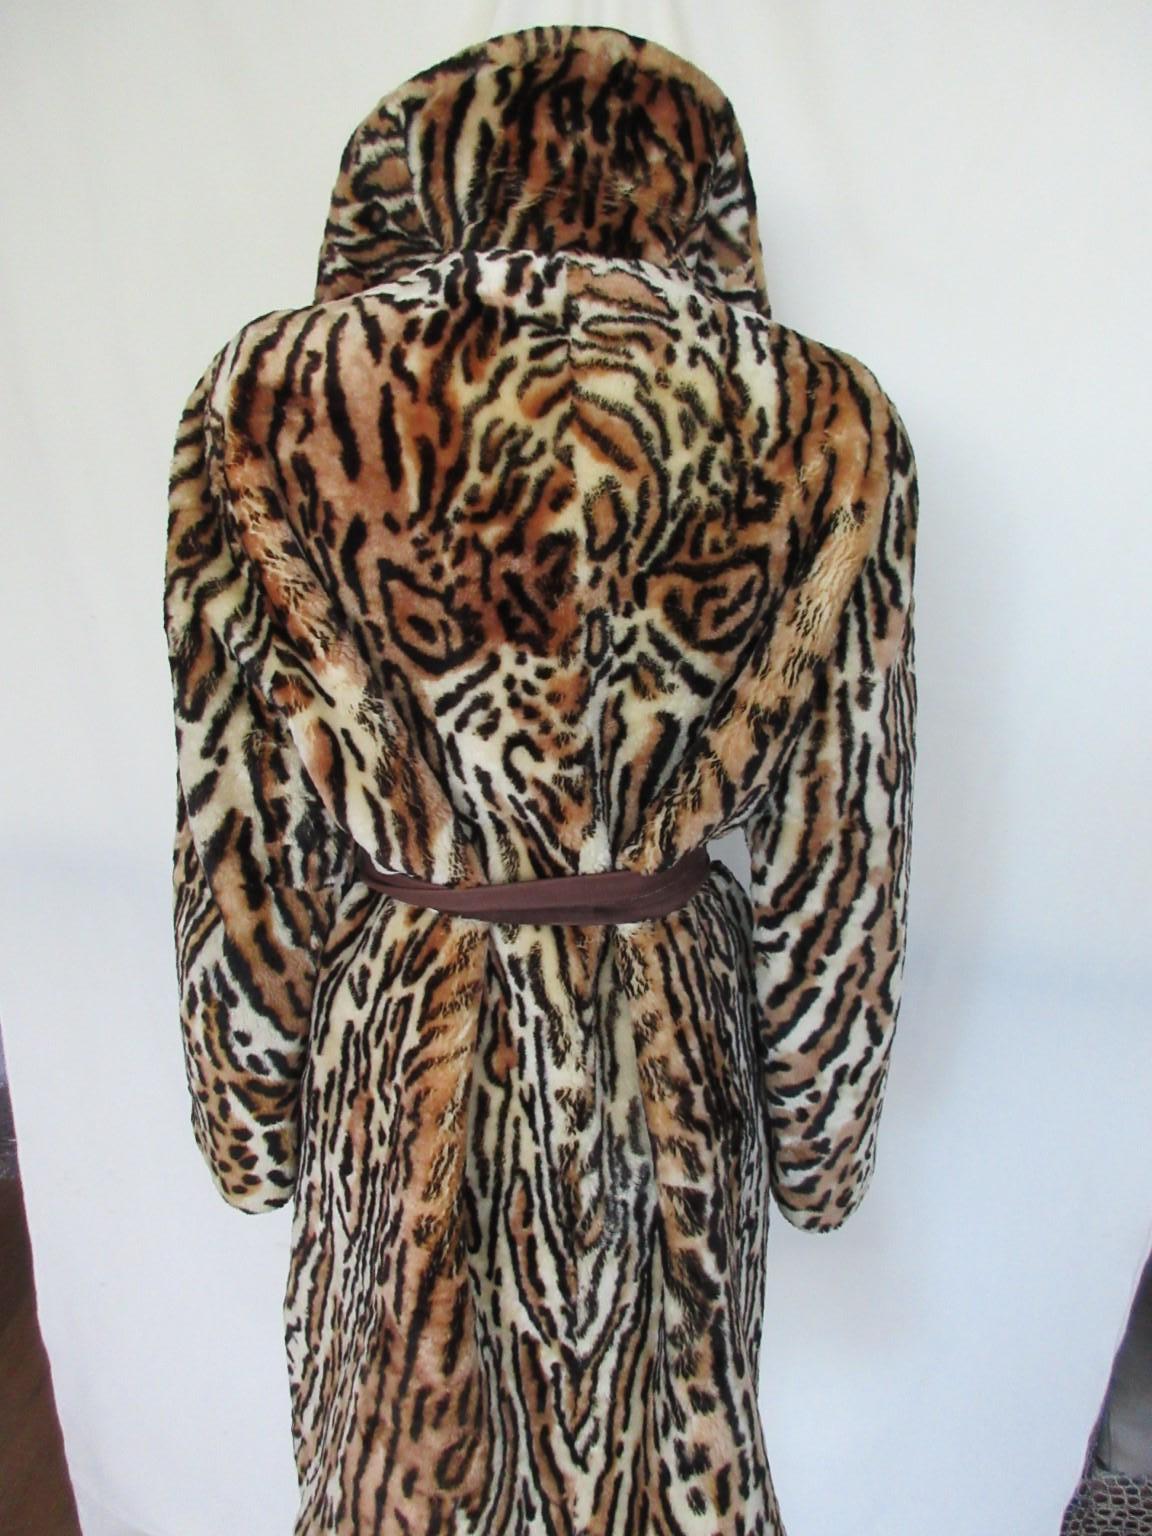 Tiger Print Sheared Beaver Fur Coat In Fair Condition For Sale In Amsterdam, NL